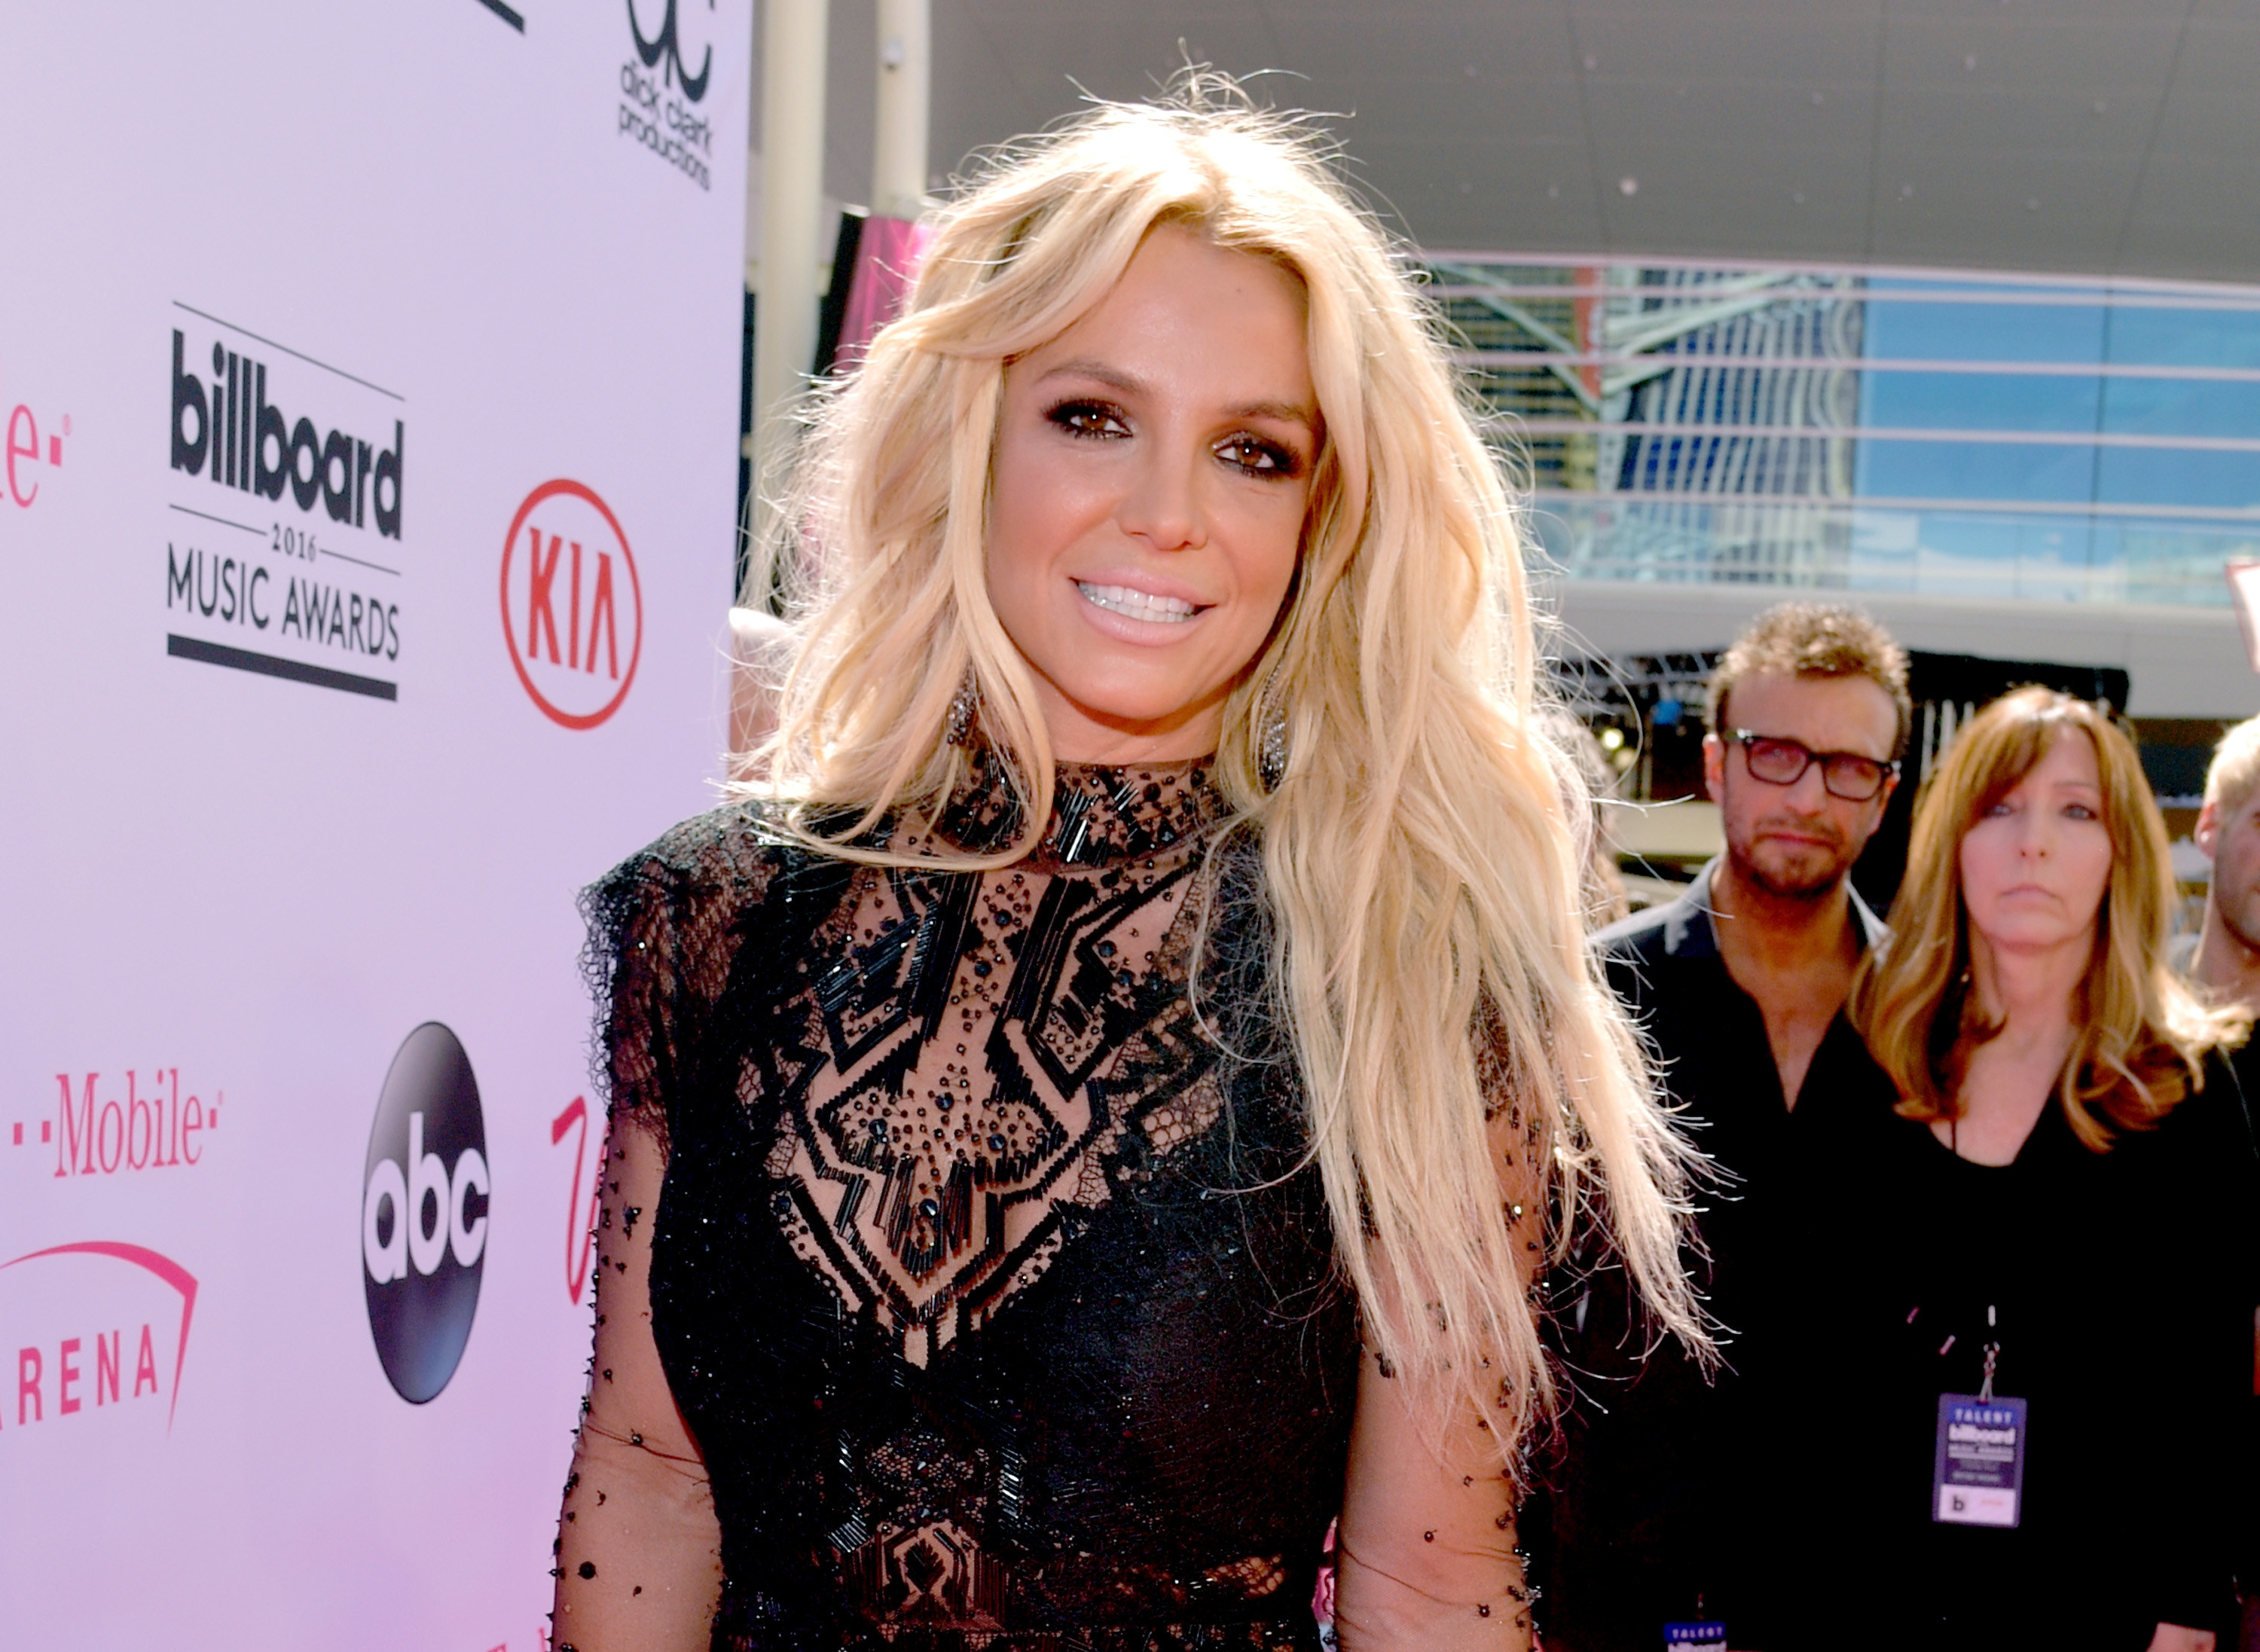 Britney Spears is at a the Billboard Music Awards wearing a lace dress and a smile